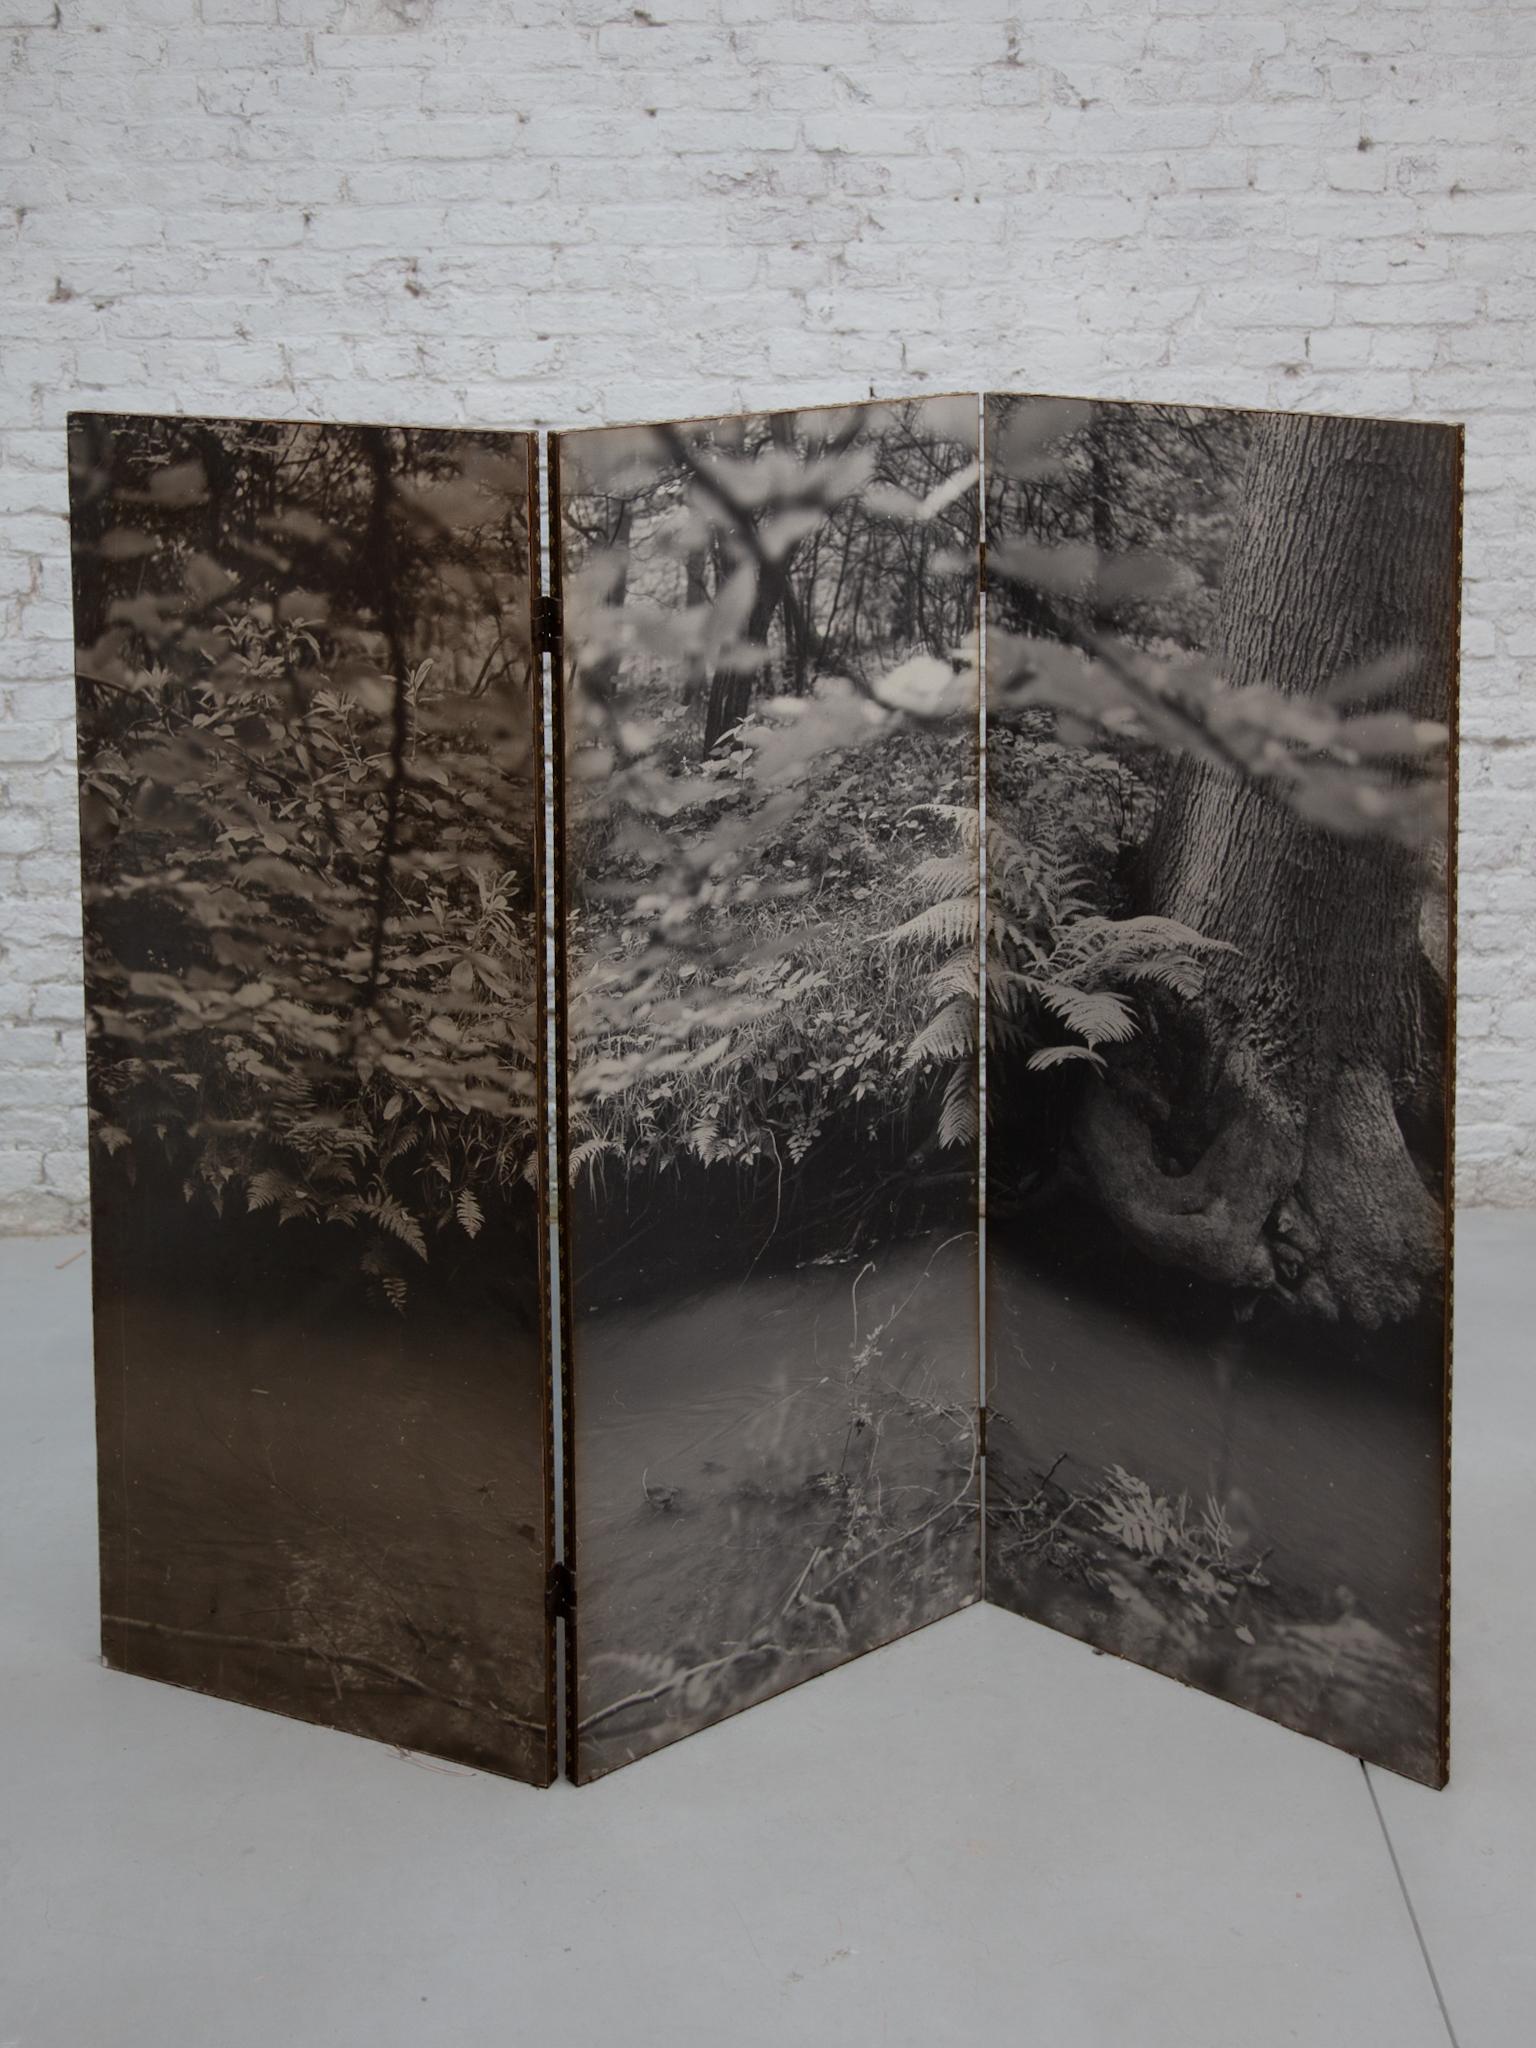 A three panel screen with a wooden structure and a Photo in black and white nature Forest decor, 1960s. Agfa-Gevaert, Belgium Pictures.